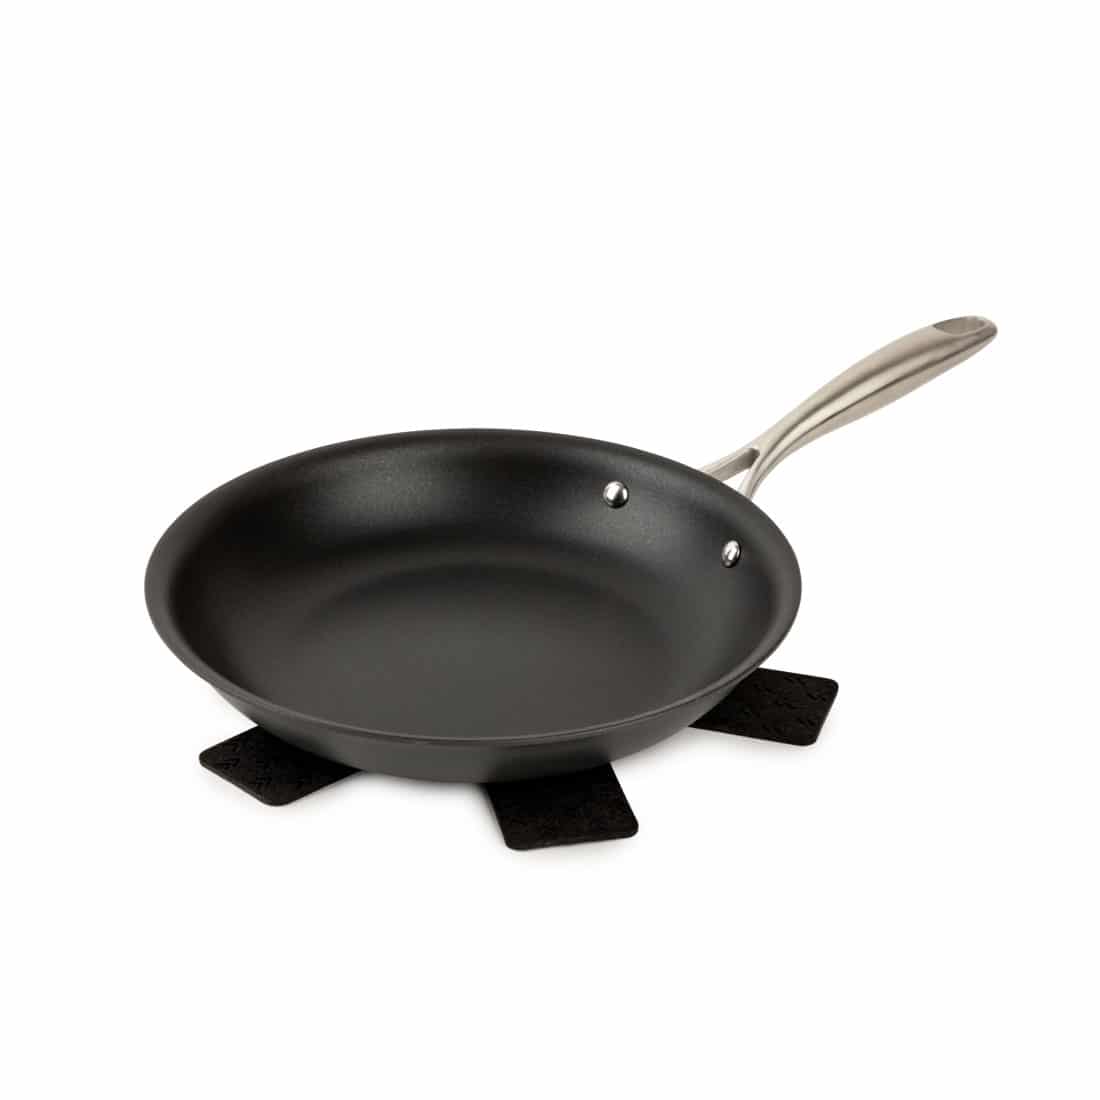 https://explorethymeandtable.com/wp-content/uploads/2021/02/hard-anodized-10in-frypan-protector-set.jpg